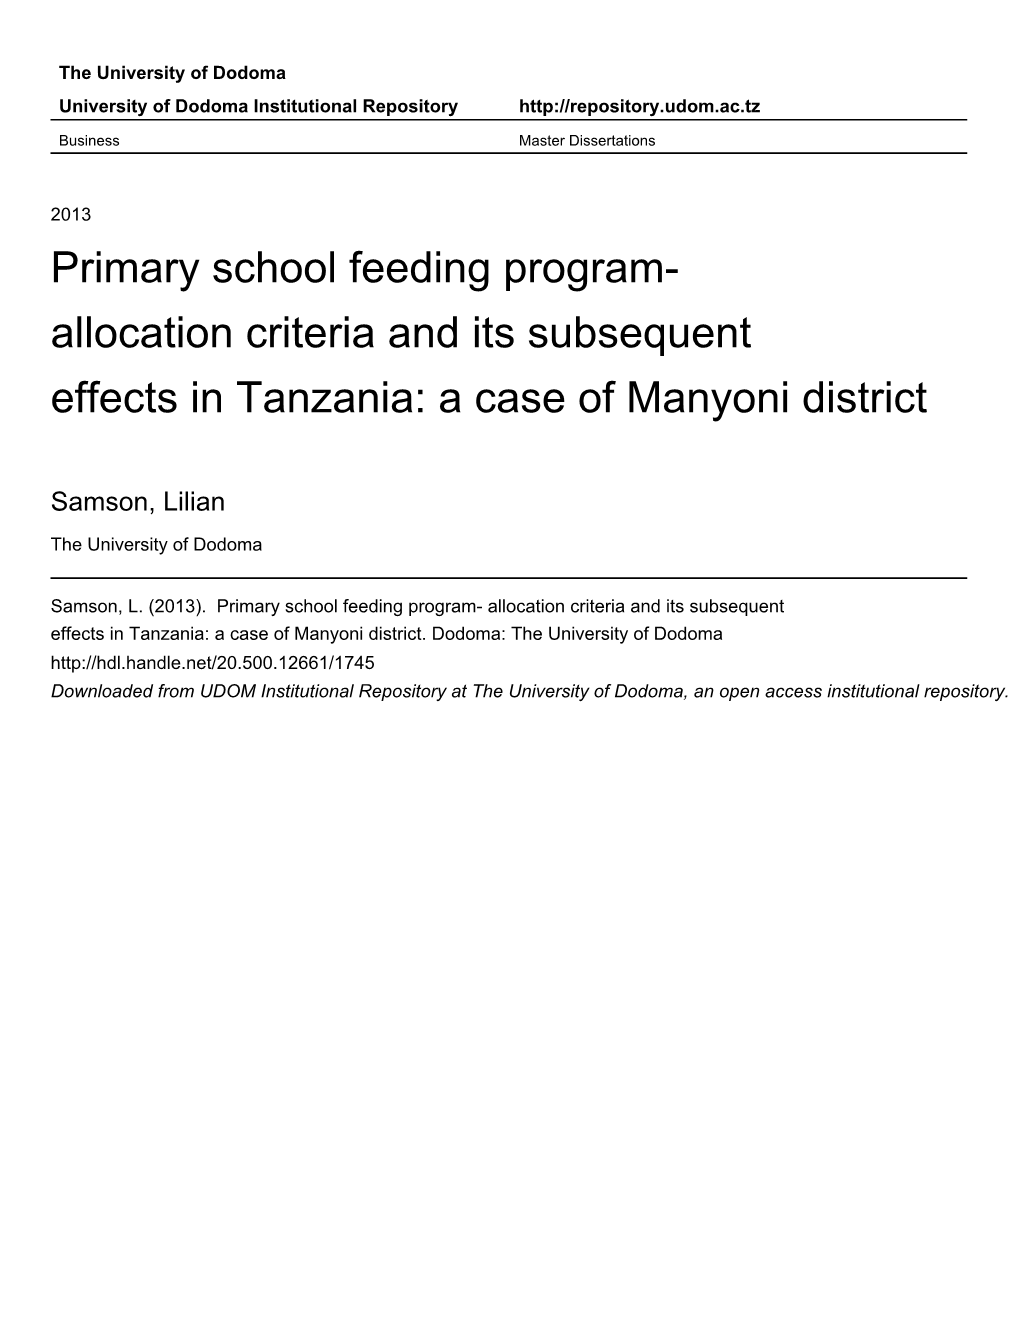 Primary School Feeding Program- Allocation Criteria and Its Subsequent Effects in Tanzania: a Case of Manyoni District